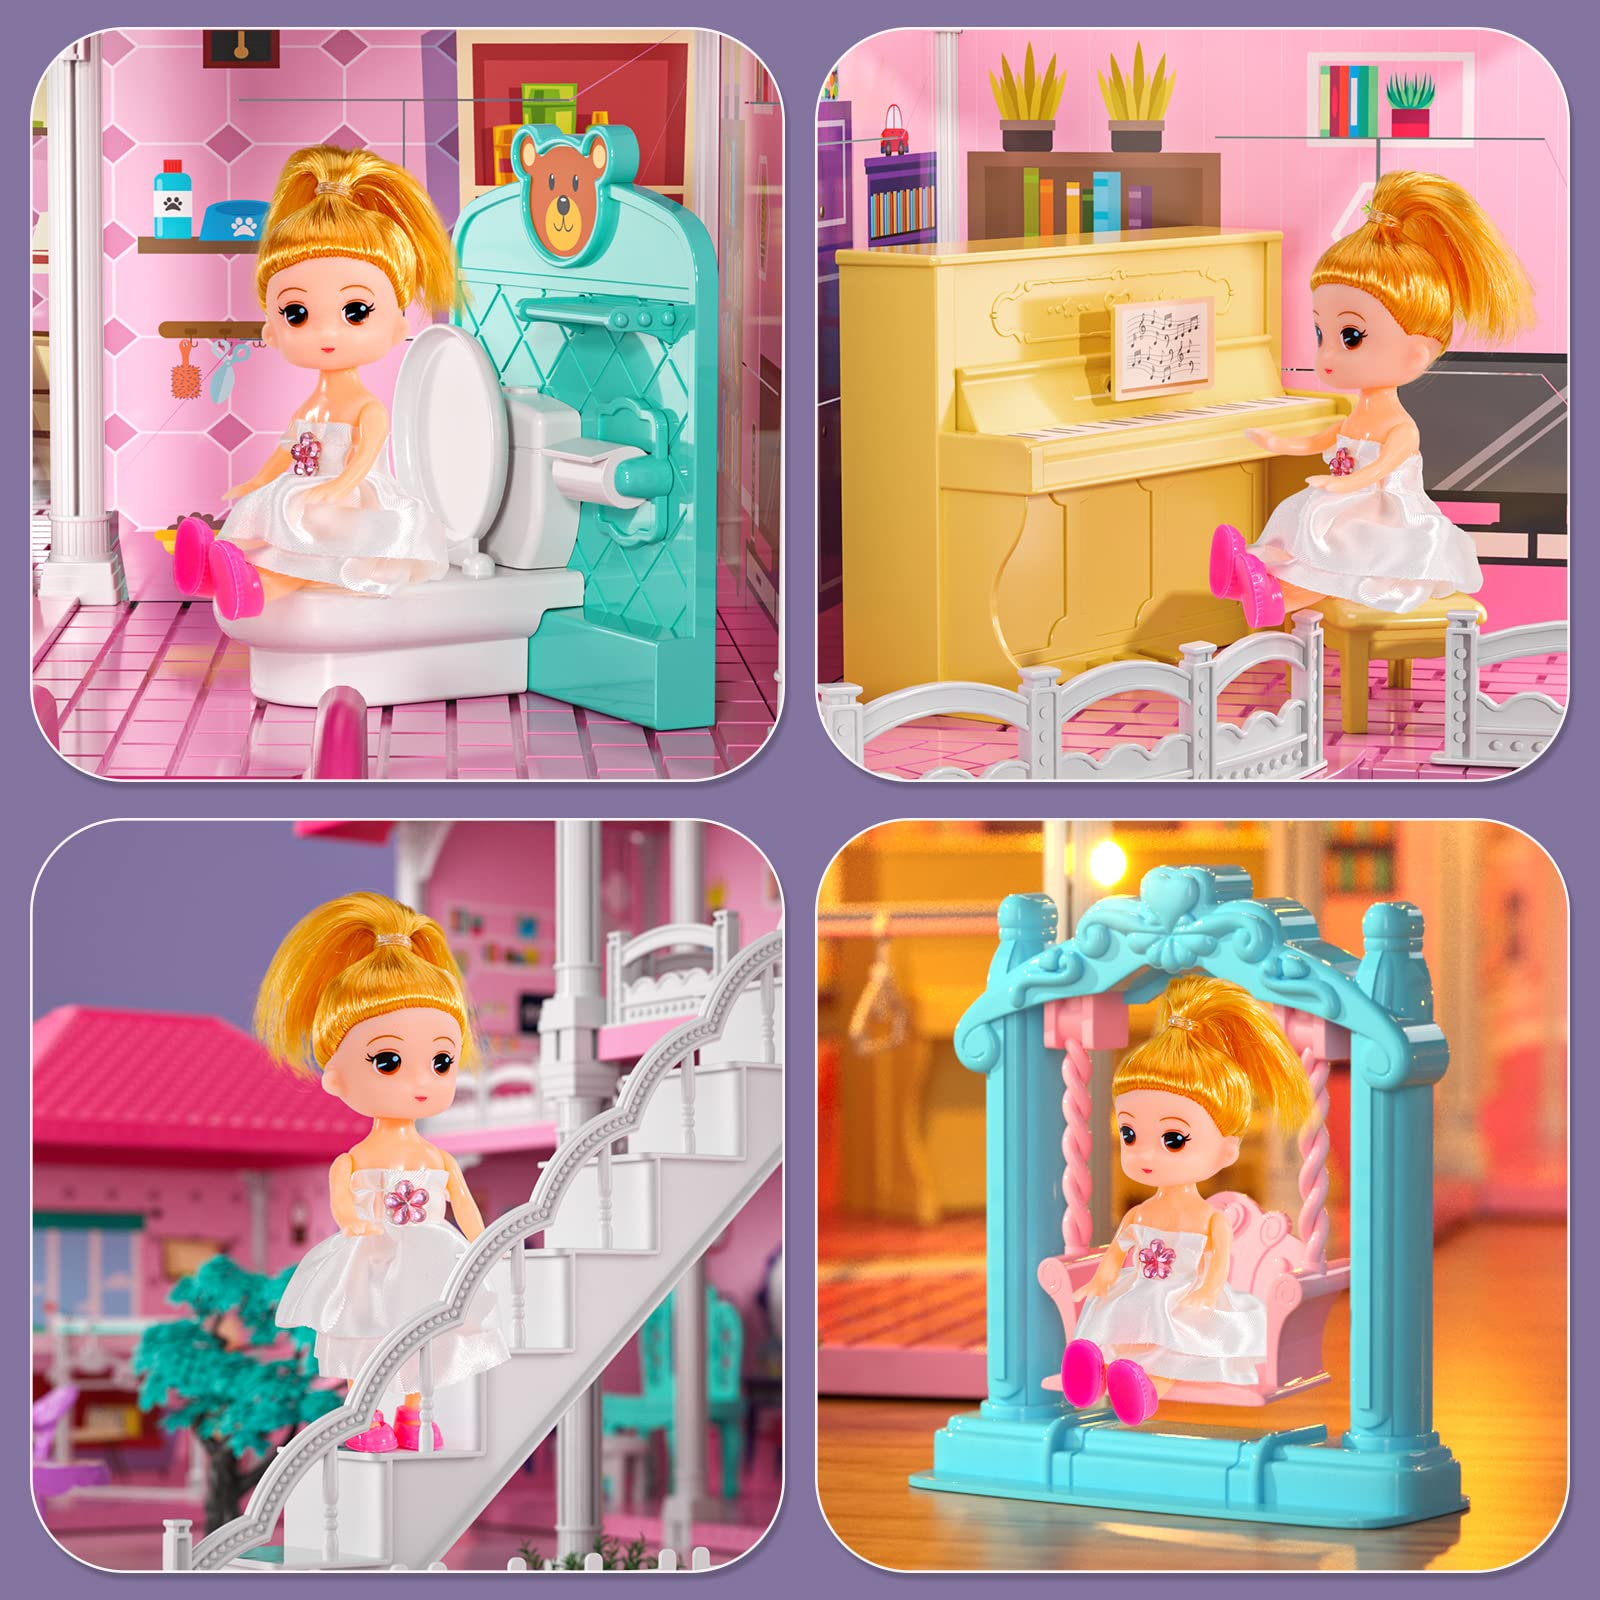 149 Piece Set Doll House for Girls,Dreamhouse, Princess Castle Set with  Fully Furnished Fashion Dollhouse,Simulation Play House with  Accessories,Gift Toy for Kids Ages 3 +